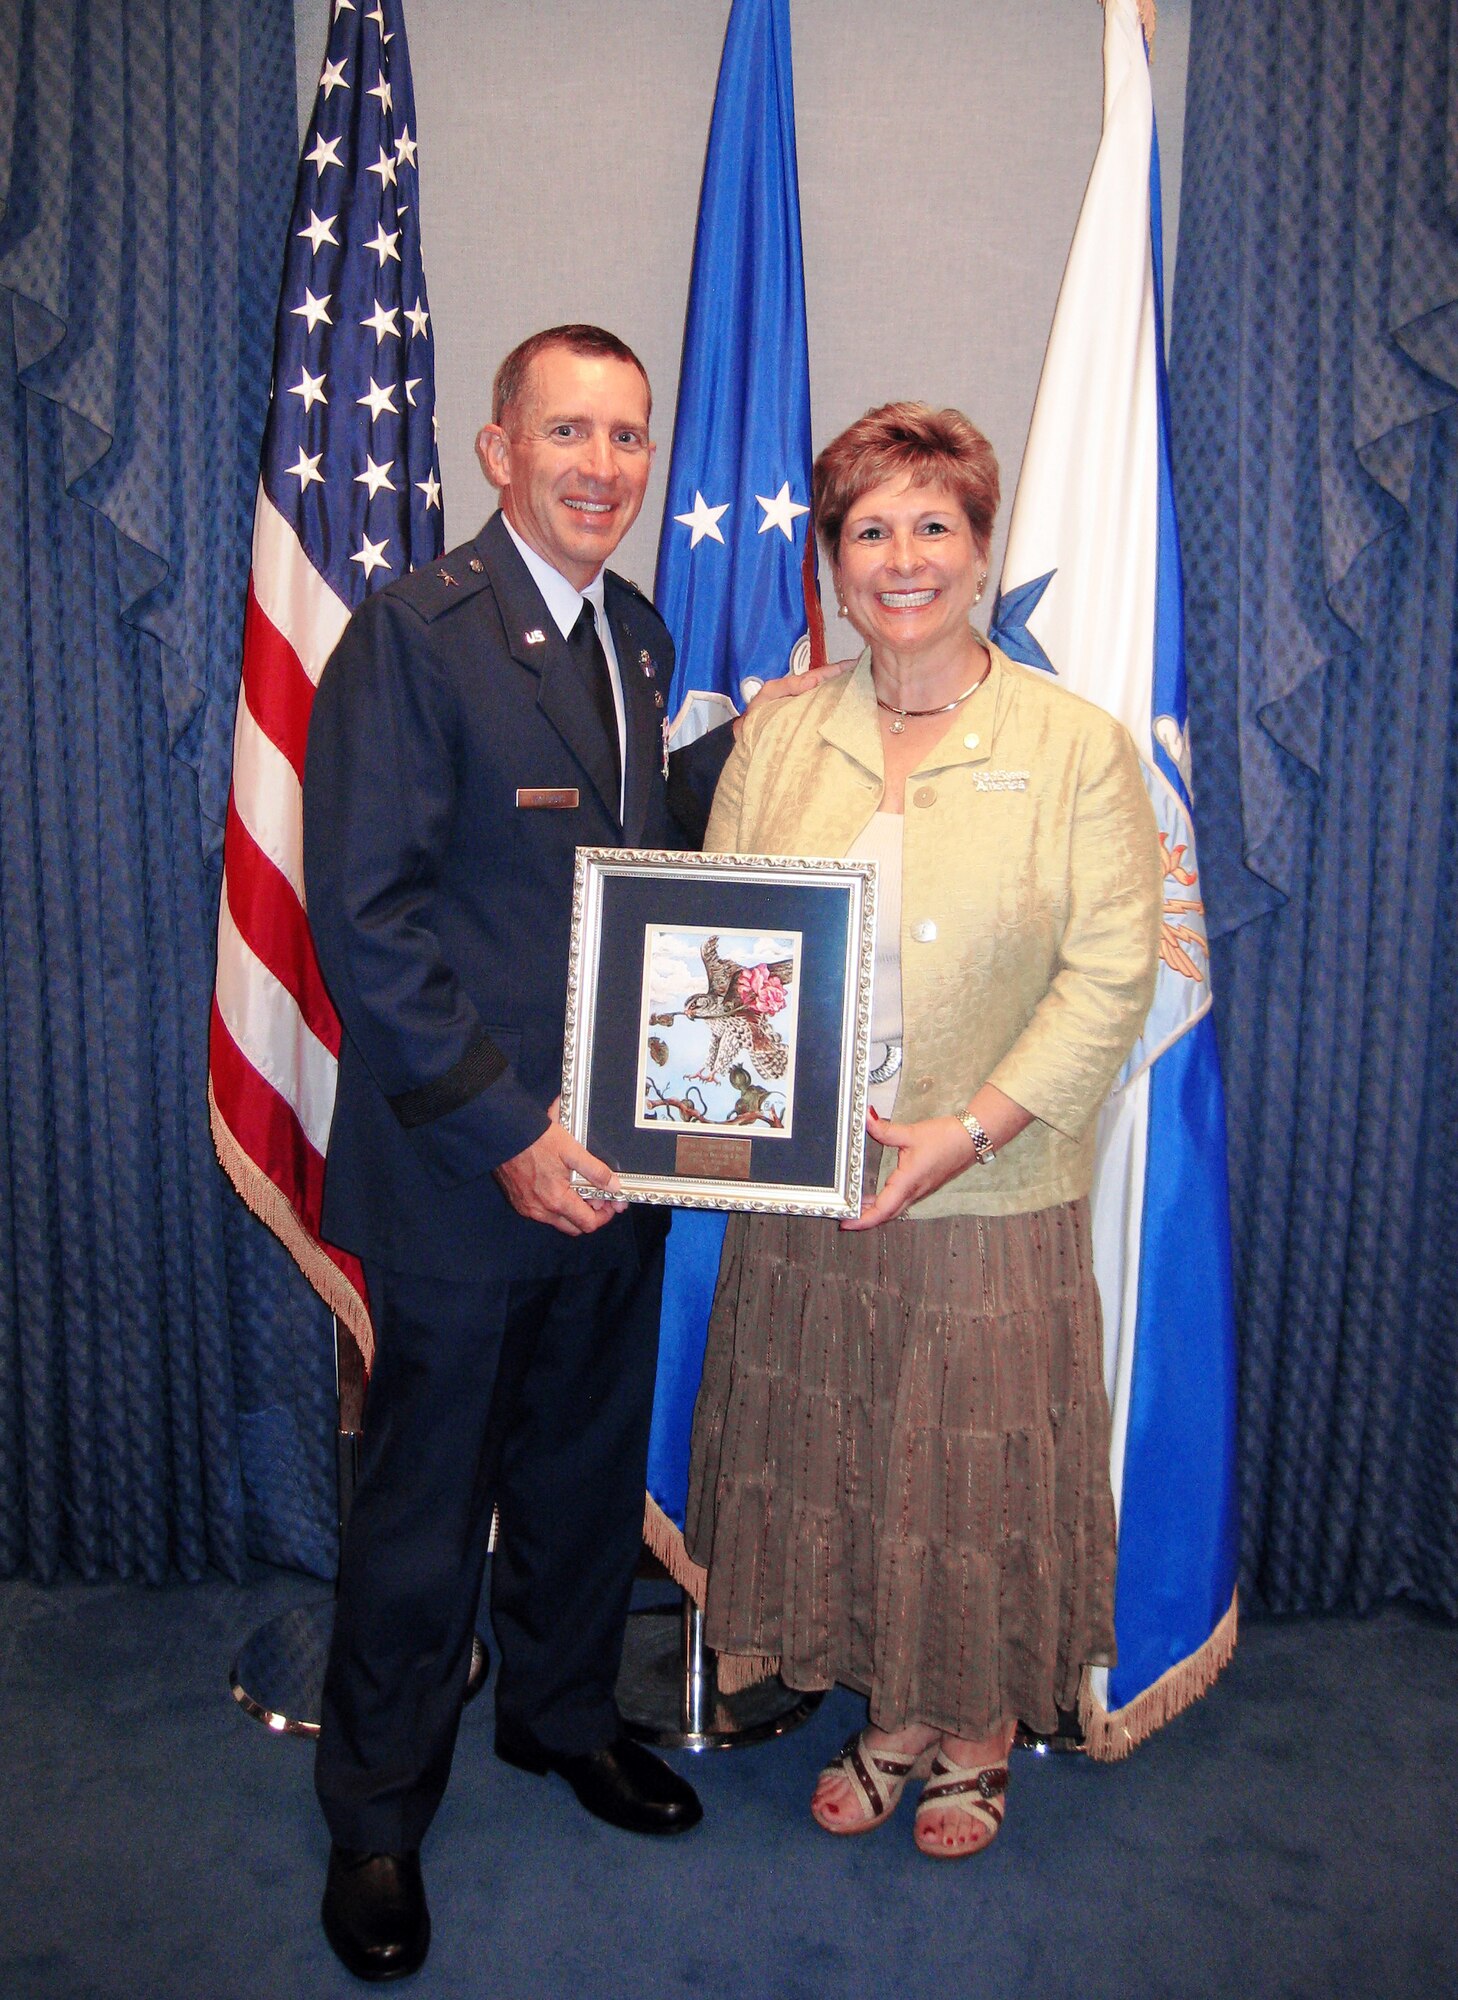 Brig. Gen. Brett and Marianne Williams show the picture of "The Falcon and the Rose" that was presented to them during a ceremony at the Pentagon Sept. 11, 2009, where they were honored with the 2009 General and Mrs. Jerome O'Malley Award.  Tradition says the falcon and rose are powerful and enduring symbols within the Air Force -- the unrivaled courage and effortless power of a falcon in flight are bound in harmony with the simple grace and unchallenged beauty of a single rose.  The O'Malley award is presented annually to the wing commander and spouse team who have best exhibited their own courage, power, grace and beauty in caring for Air Force families.  (Courtesy photo)